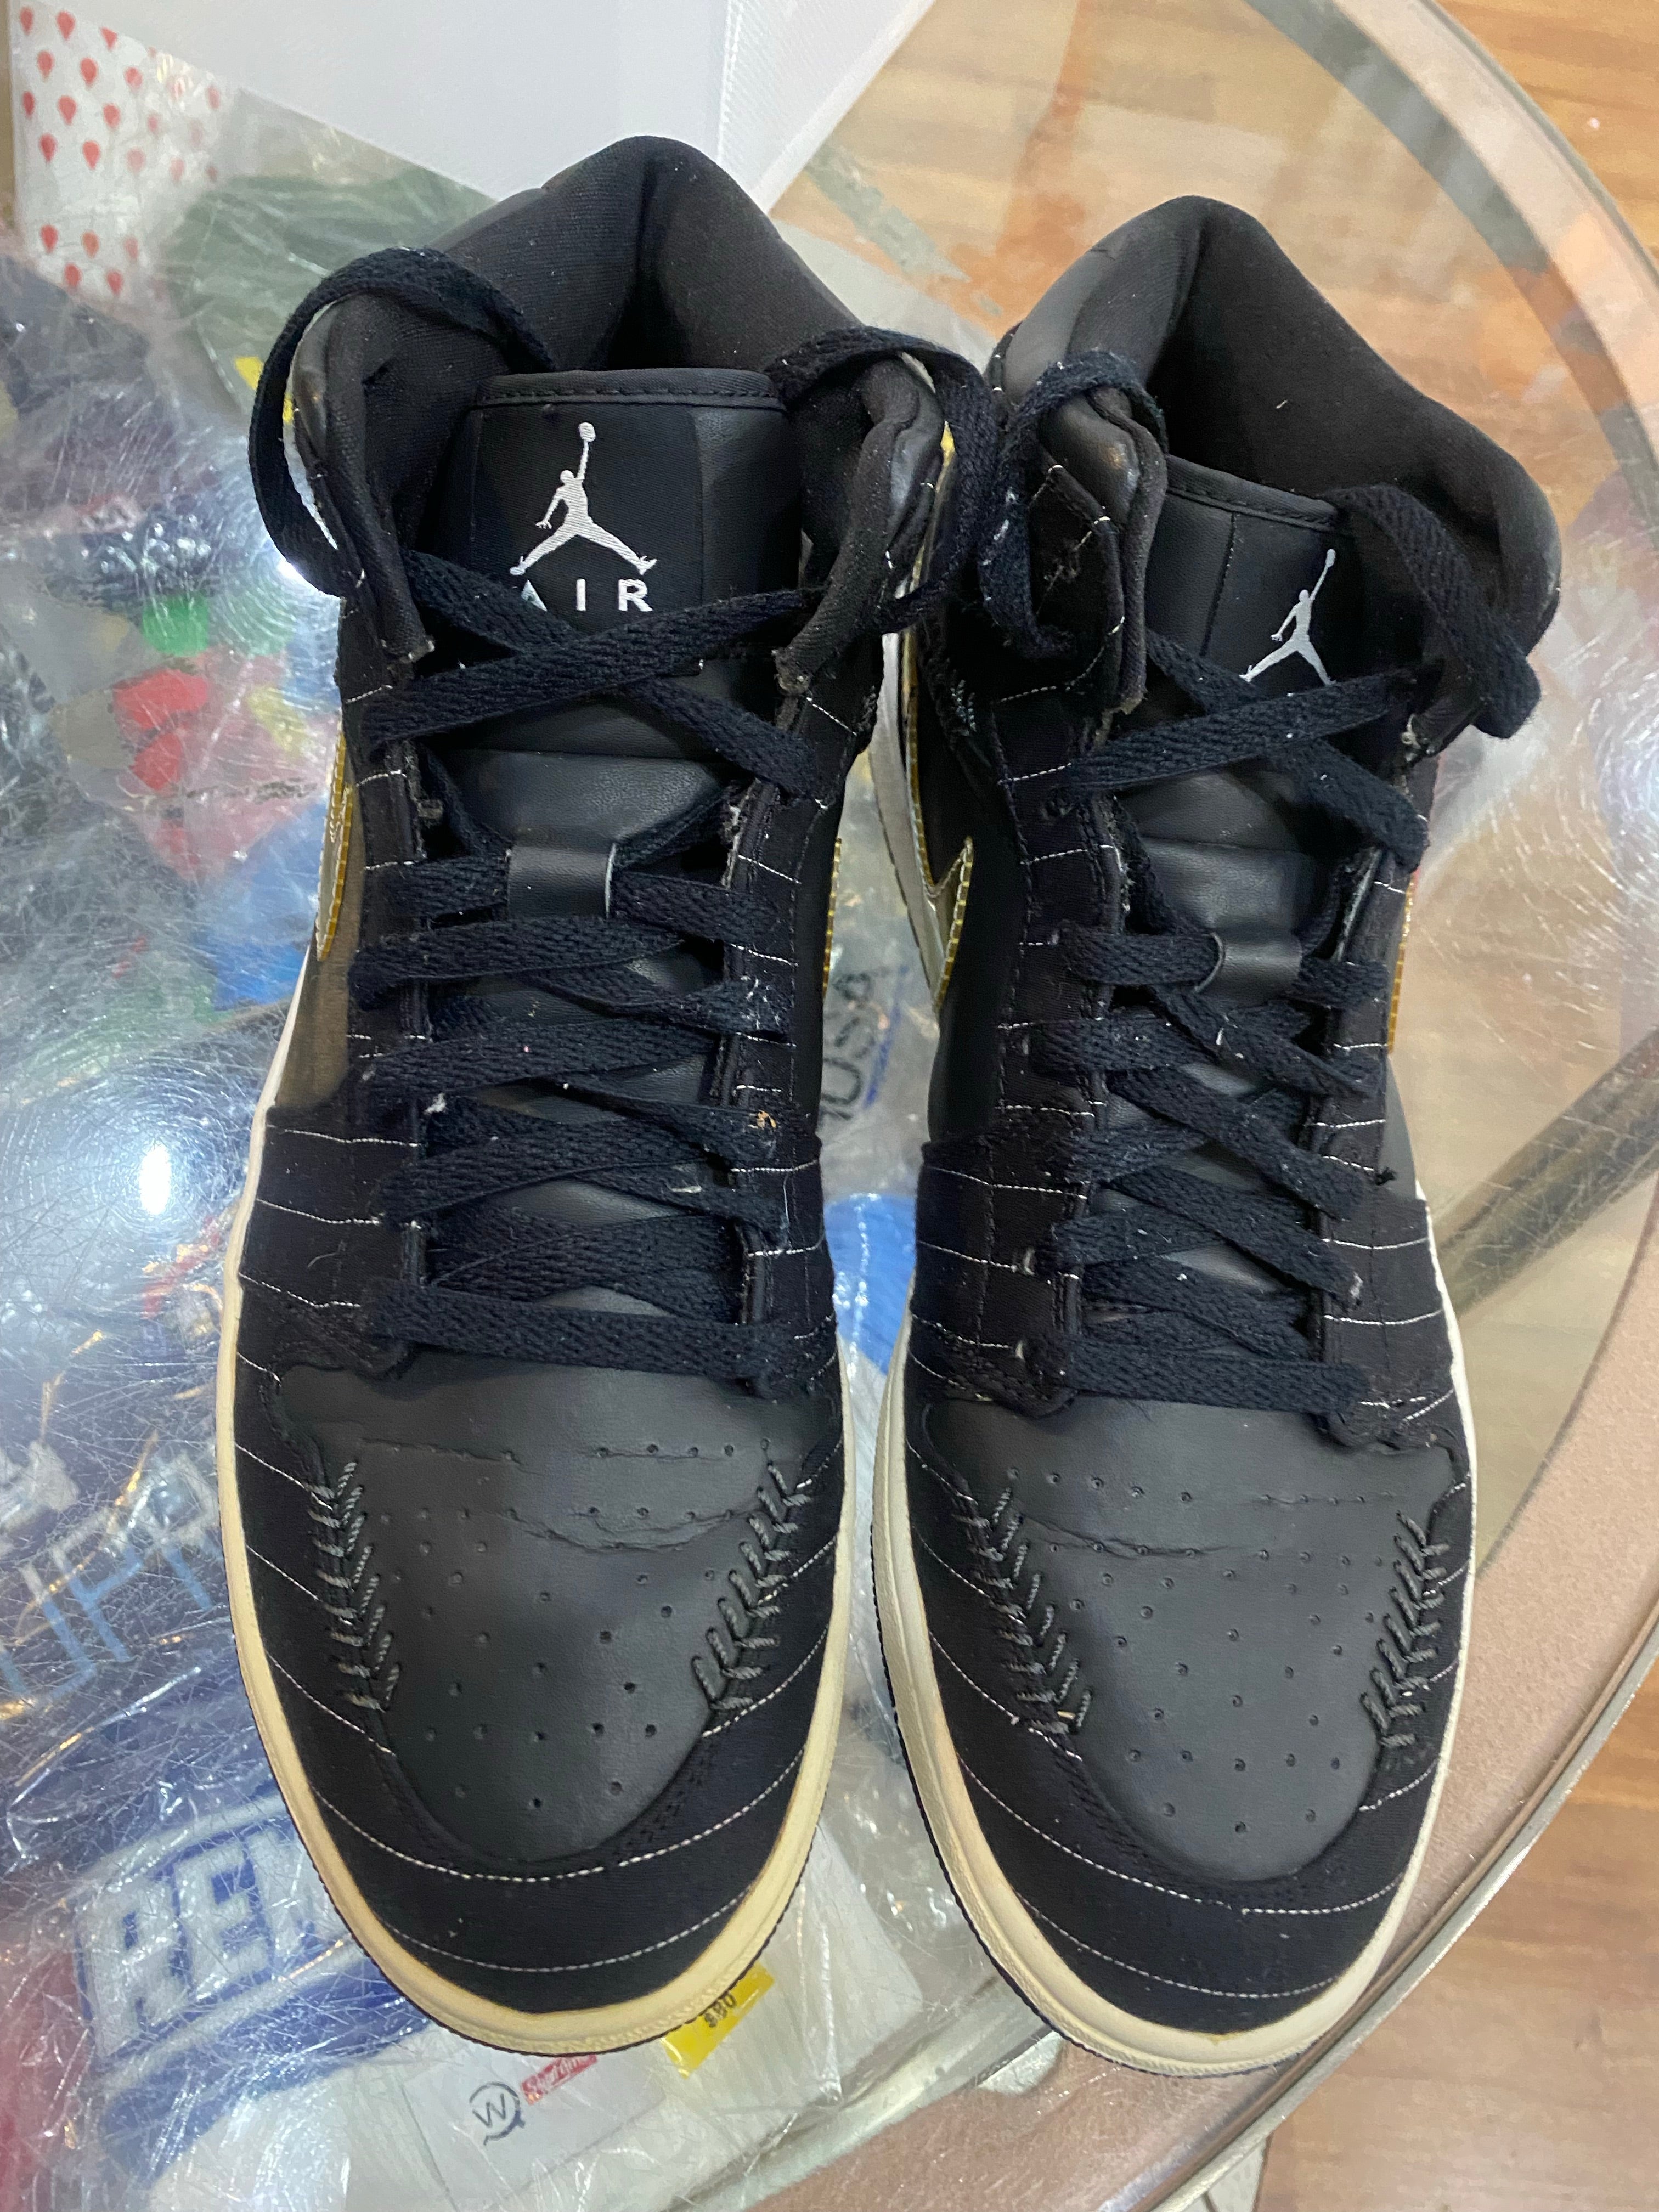 Black Opening Day 1s size 10.5